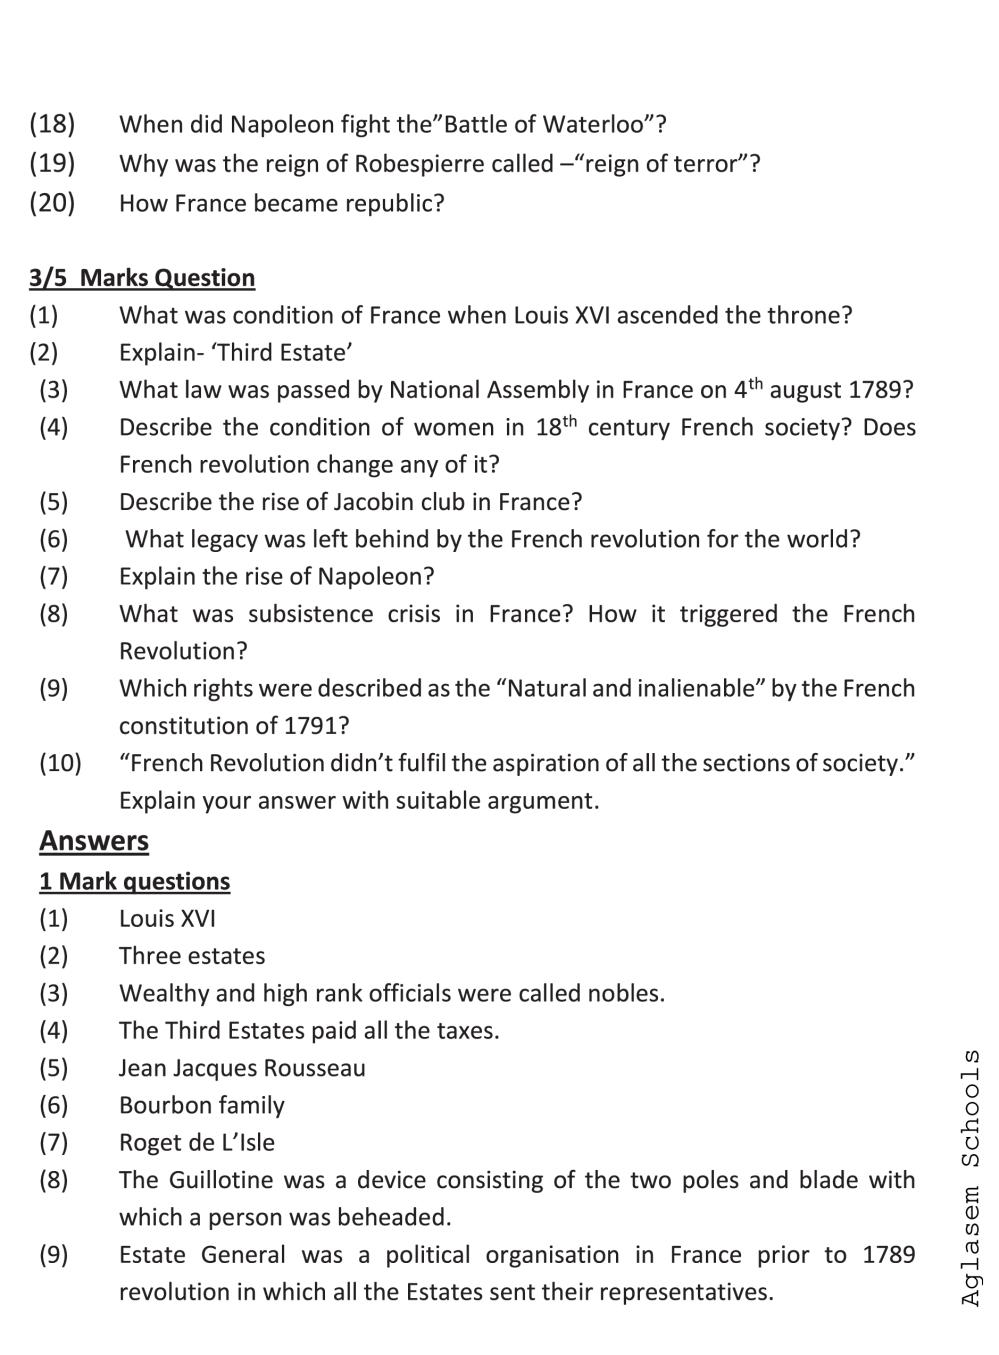 critical thinking questions about the french revolution